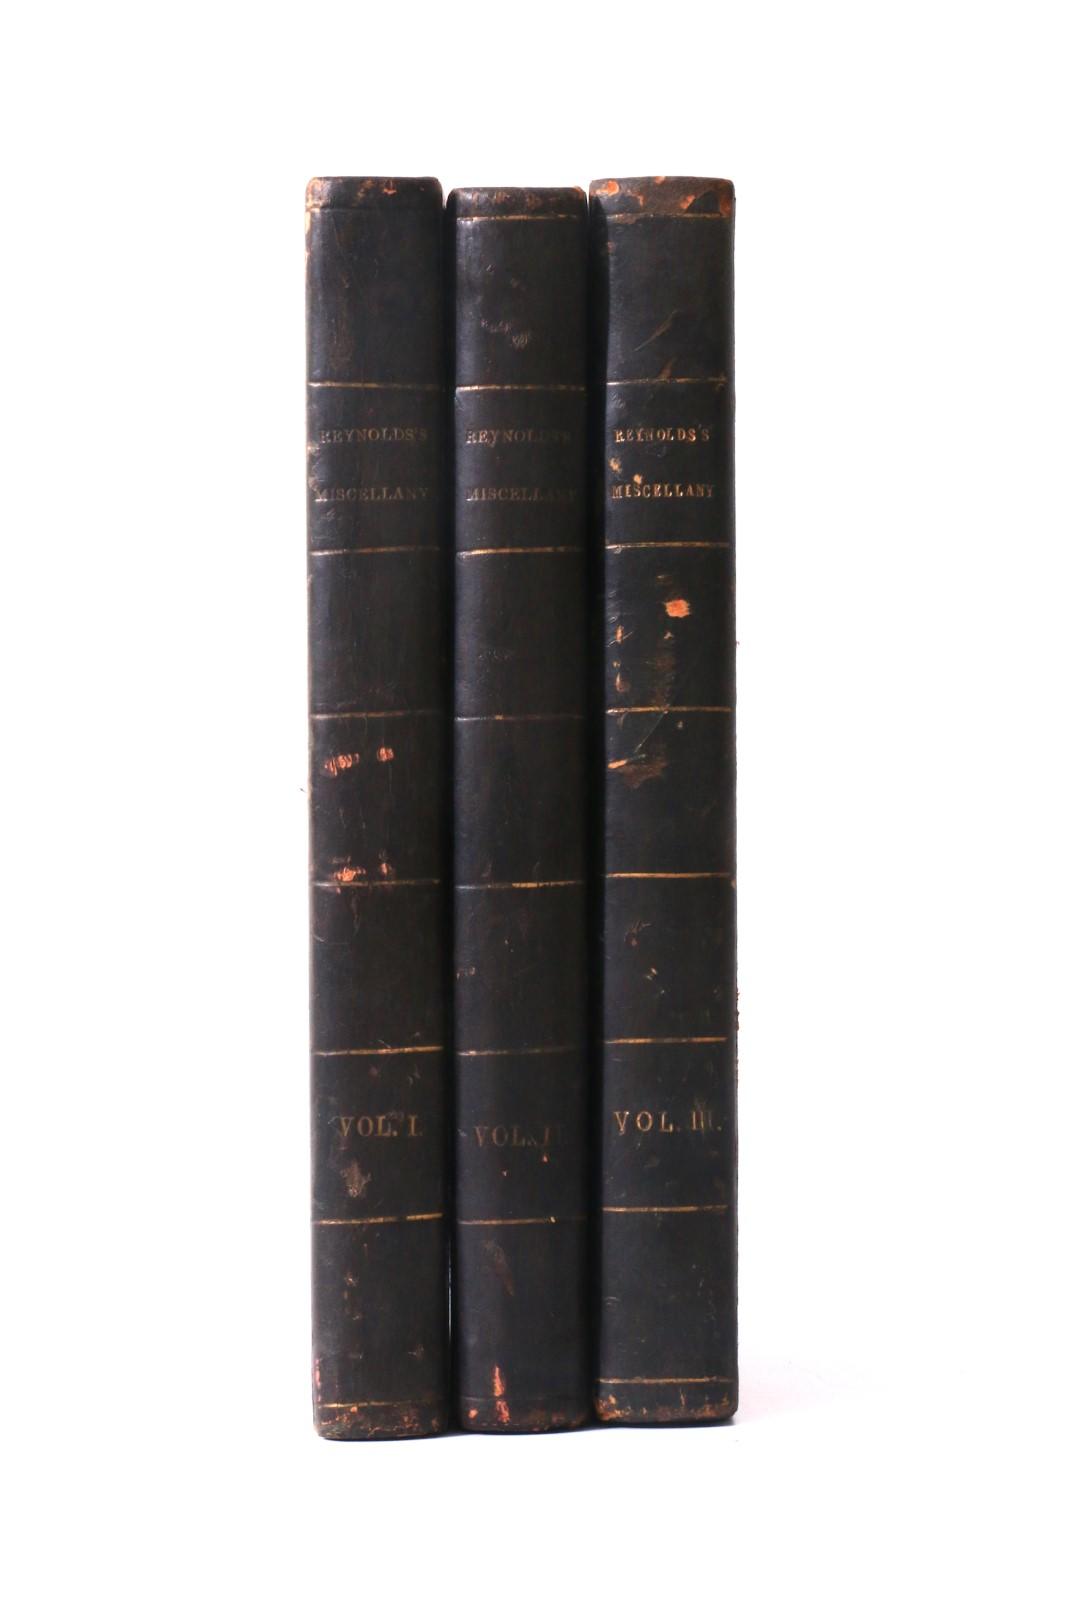 George W.M. Reynolds [ed.] - Reynolds's Miscellany of Romance, General Literature, Science and Art - John Dicks, 1846-1848, First Edition.